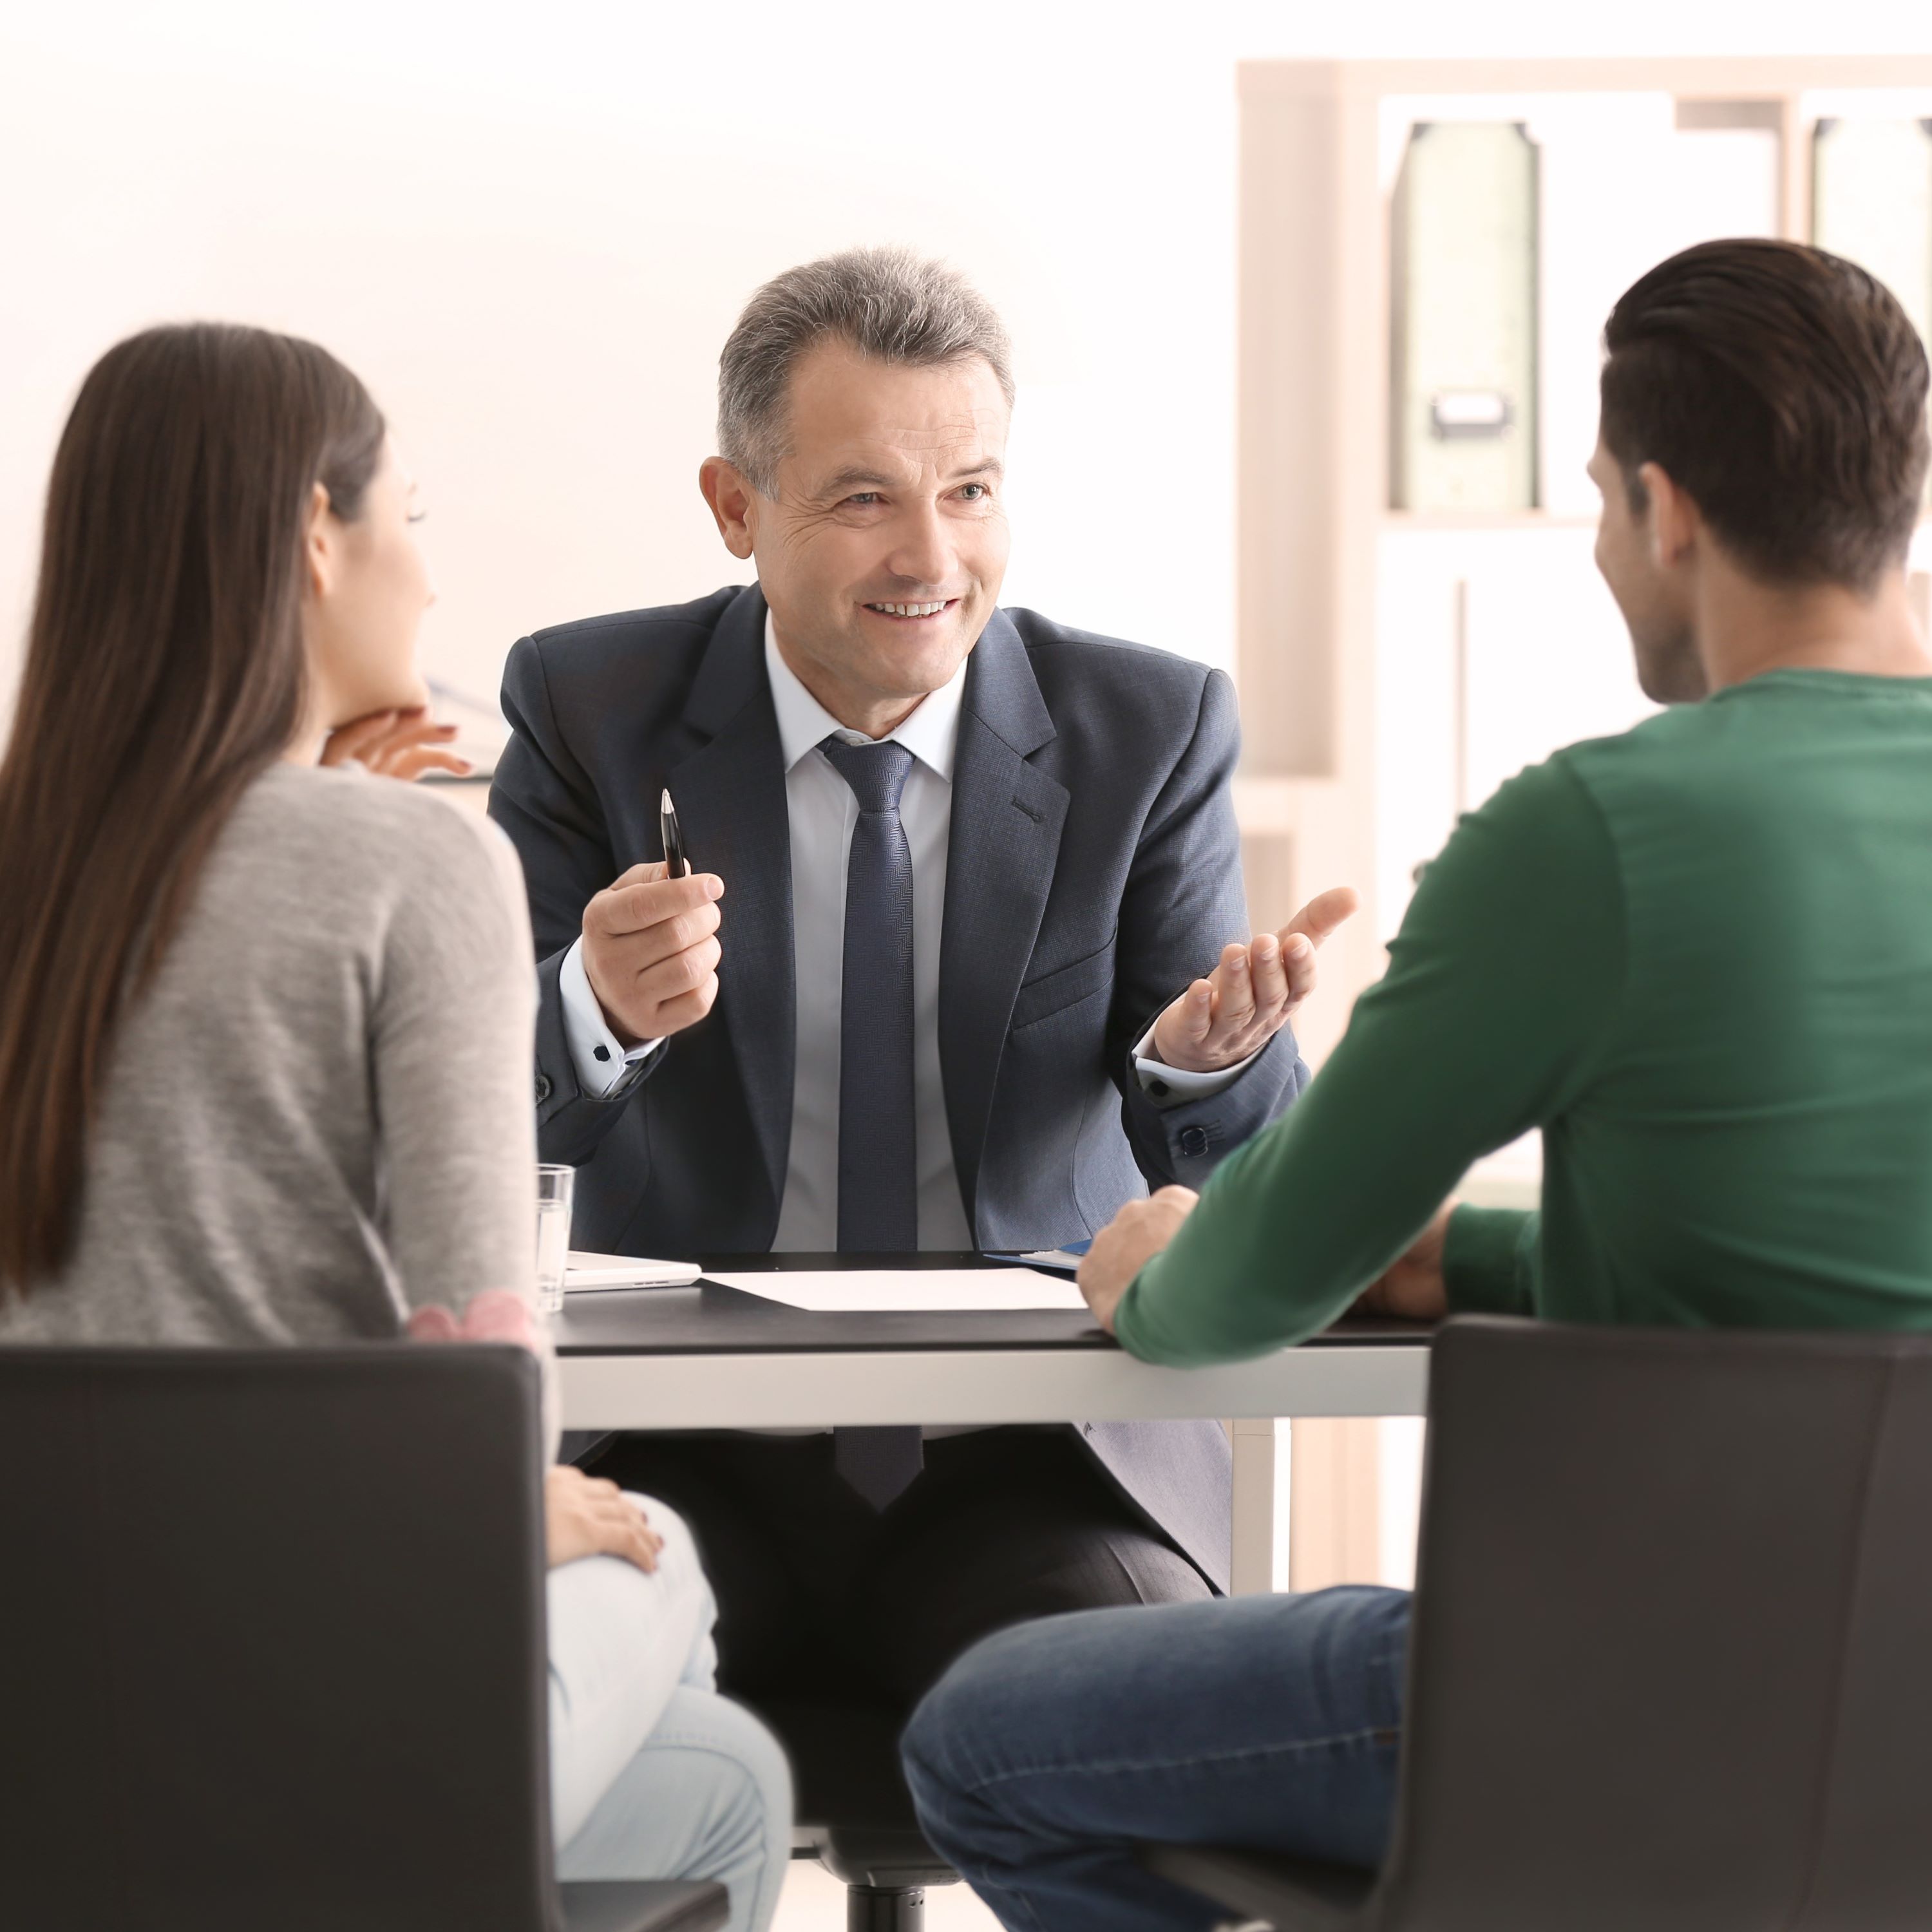 Family mediation: how it works, what to expect and how to prepare